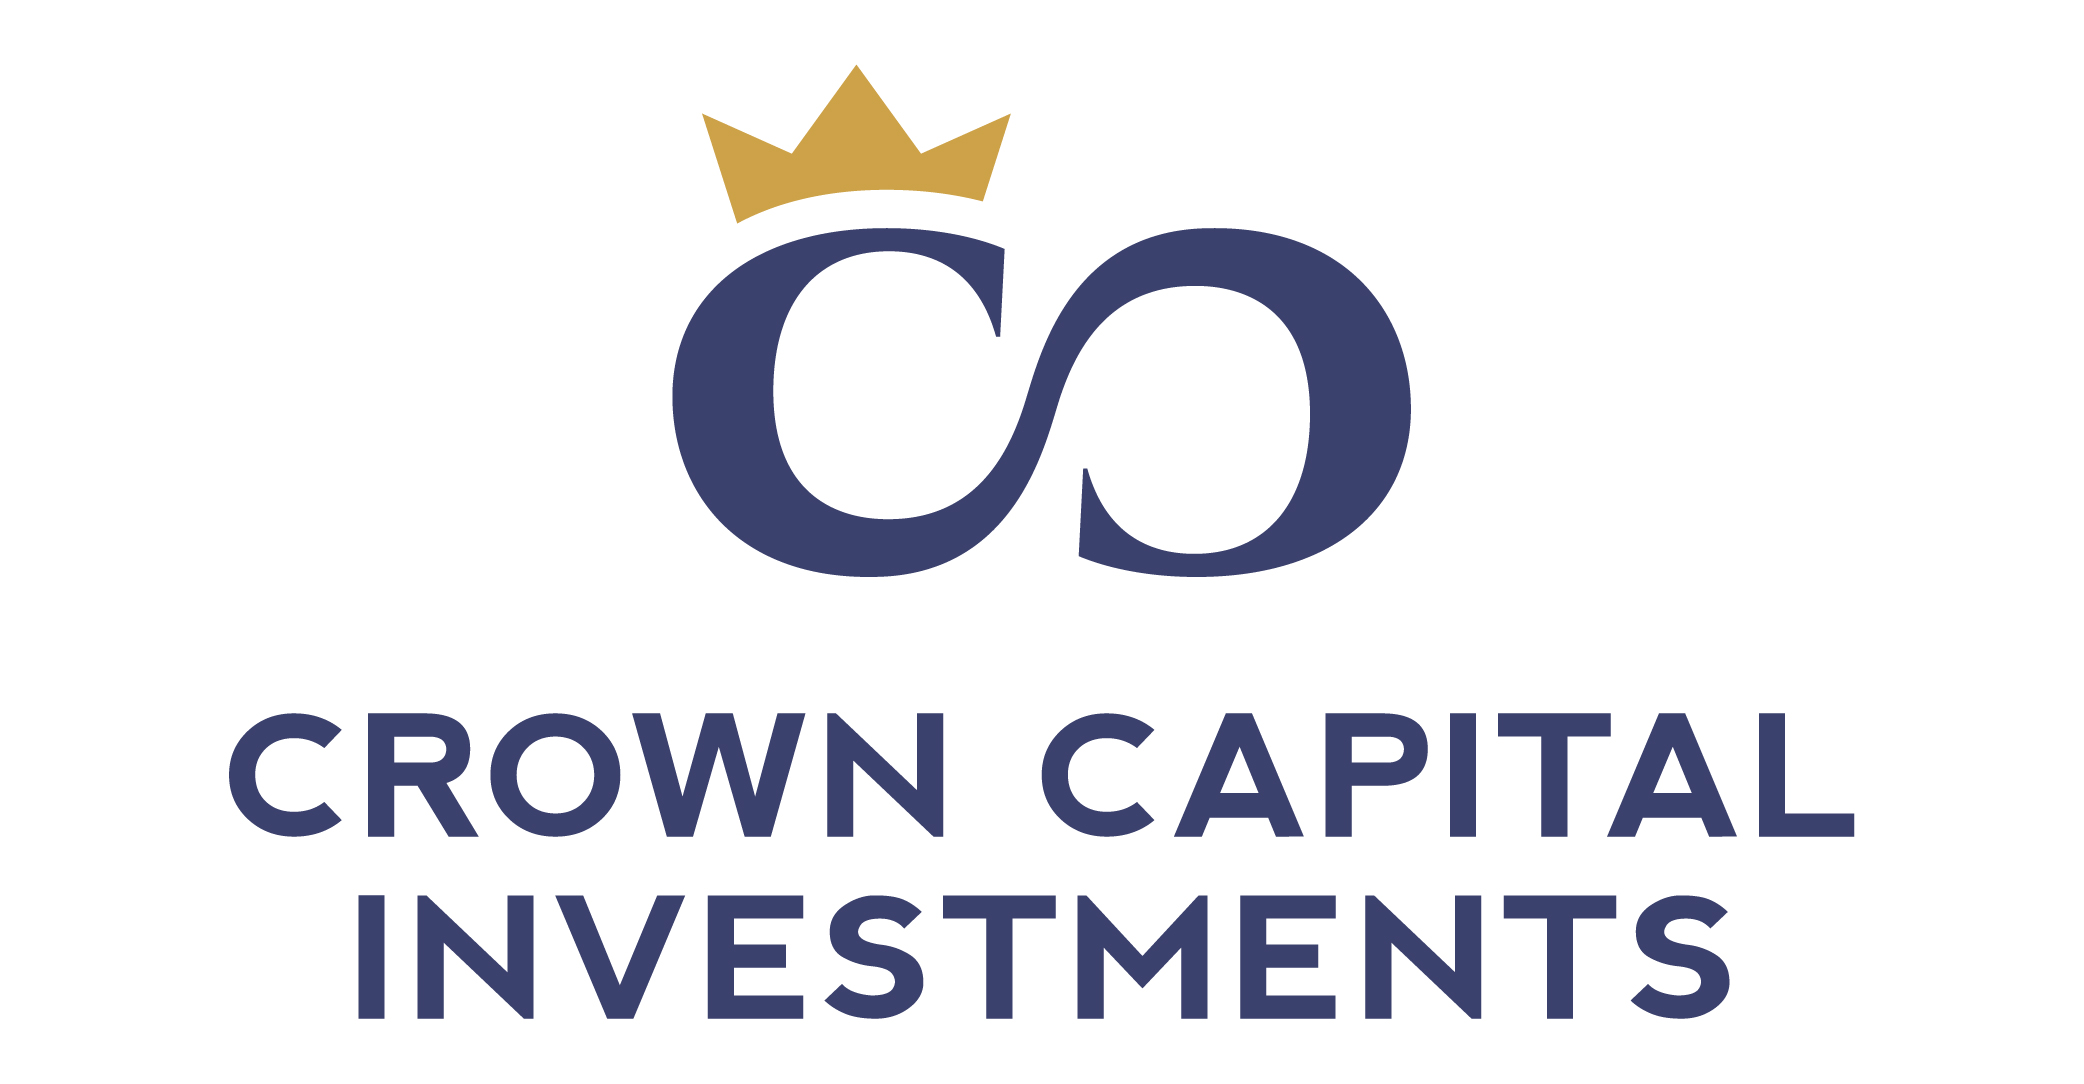 Crown Capital Investments, Friday, June 3, 2022, Press release picture